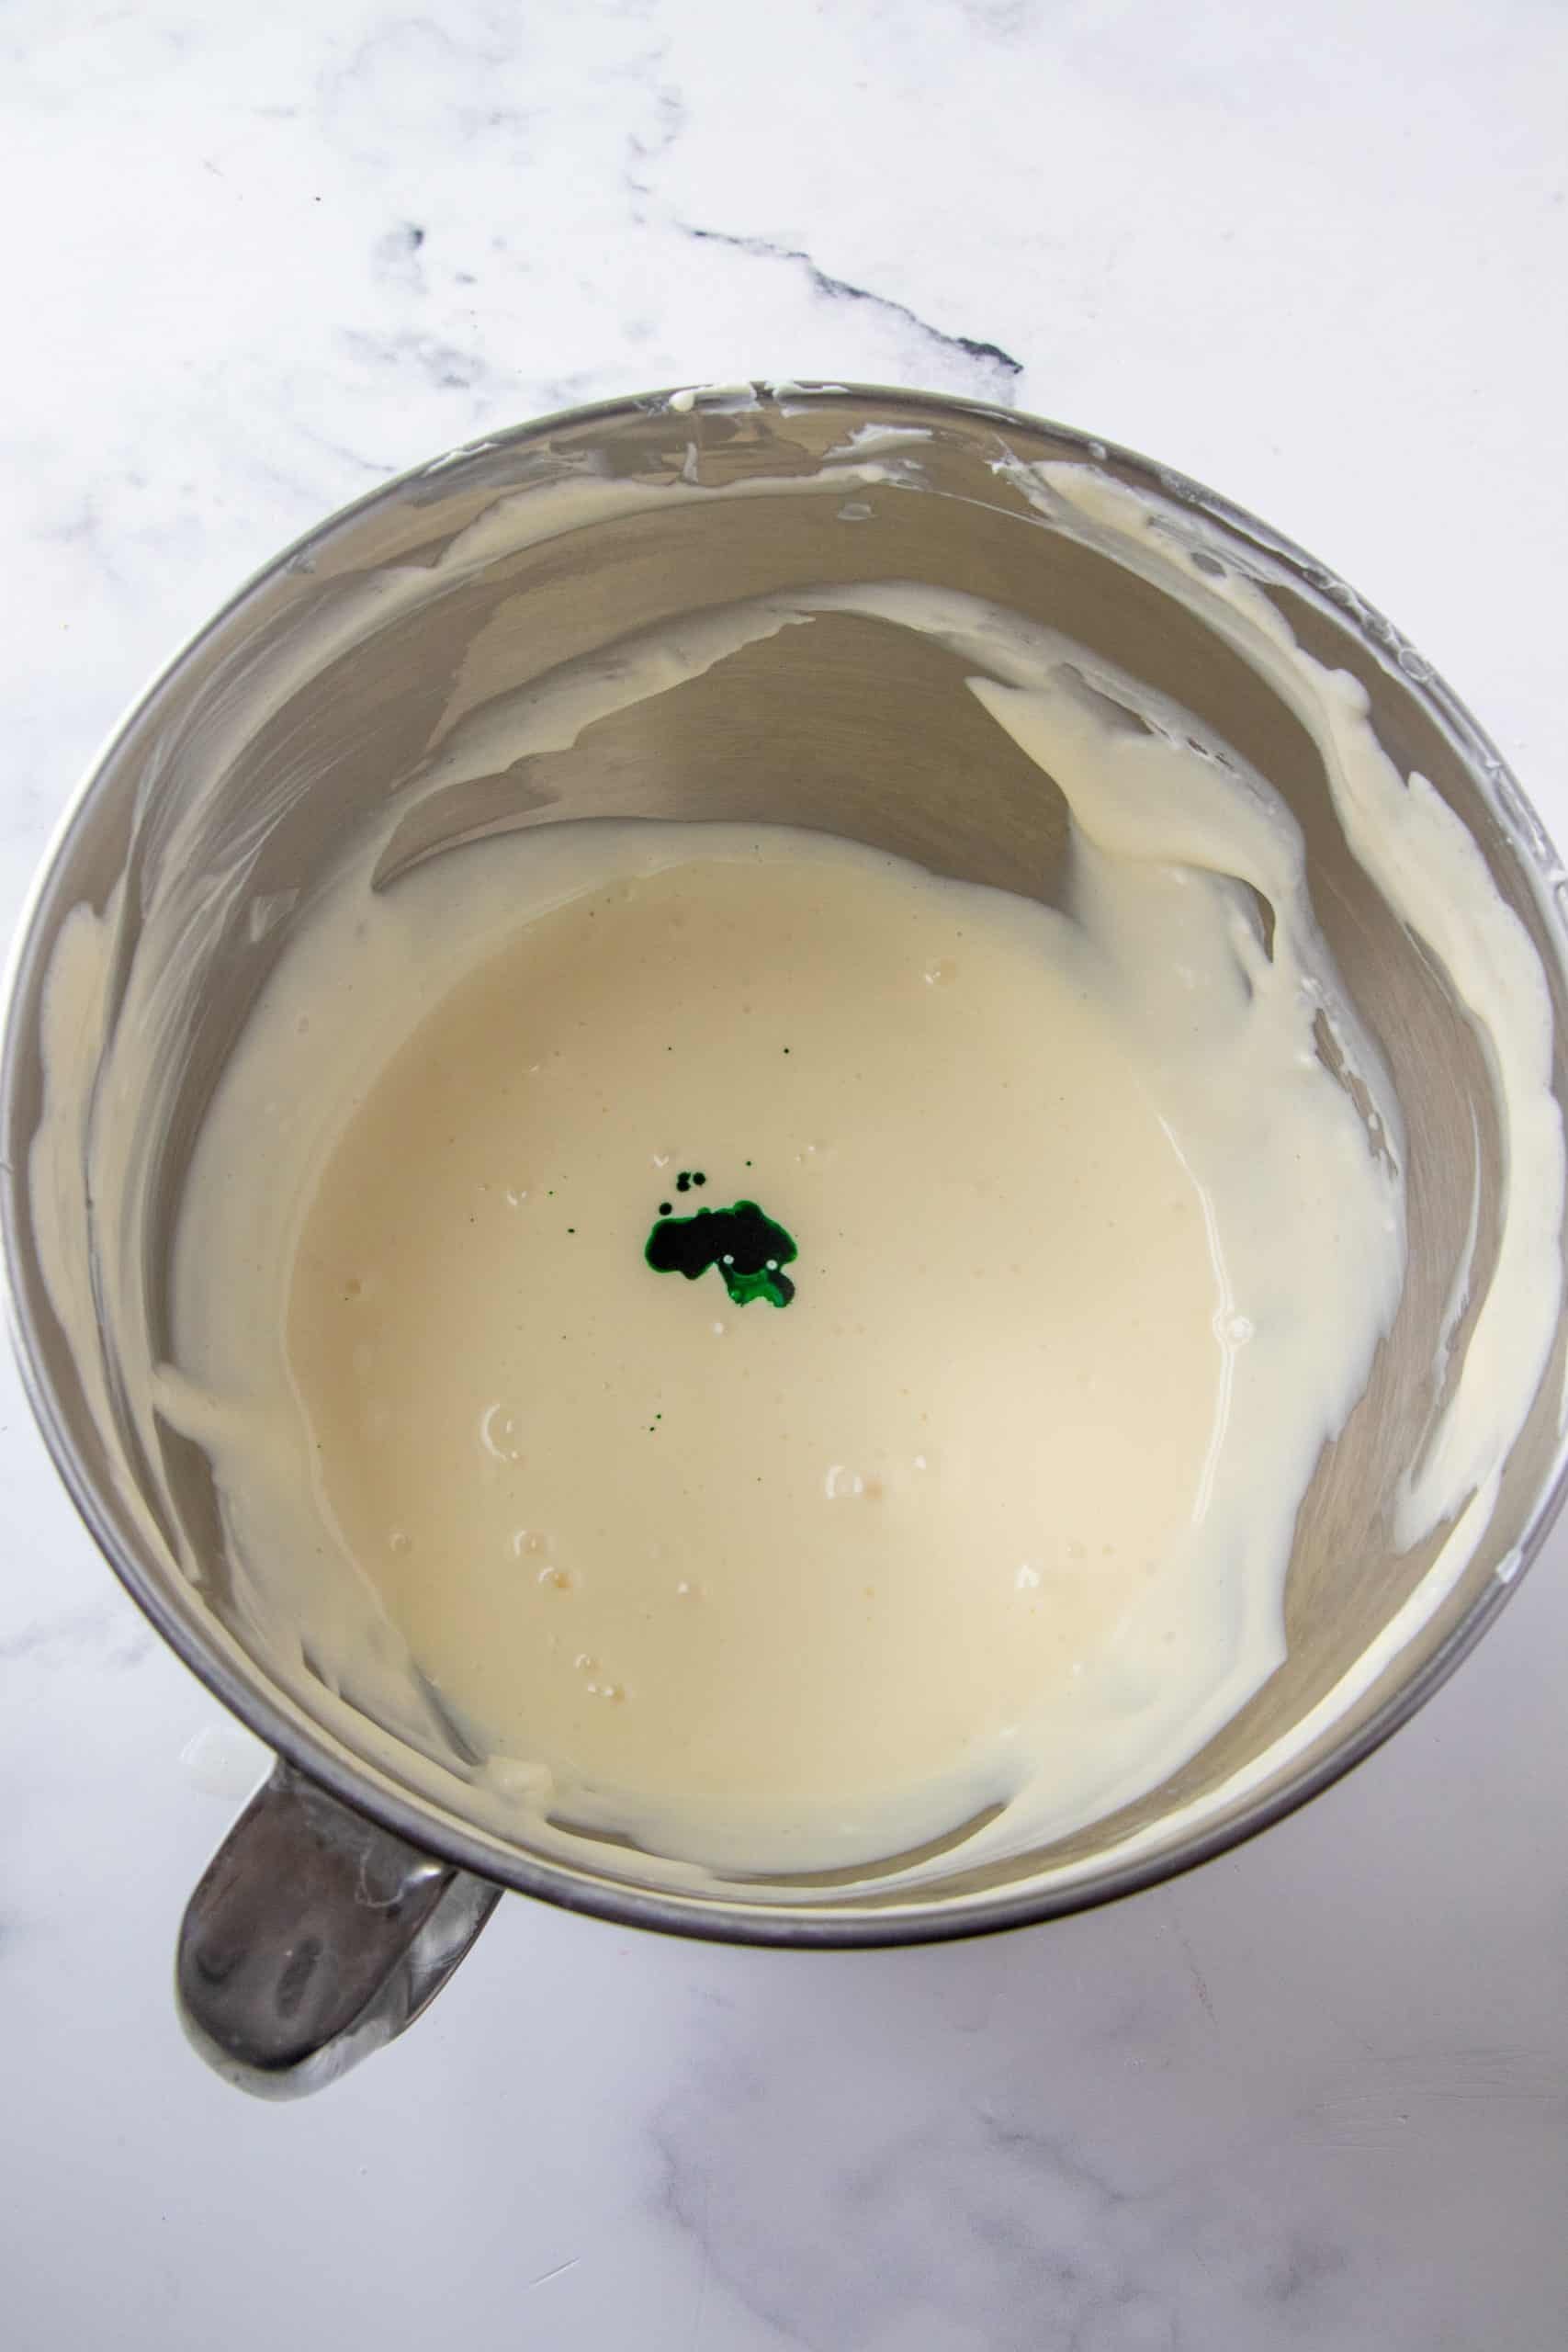 Green food color added to cheesecake batter in silver mixing bowl.